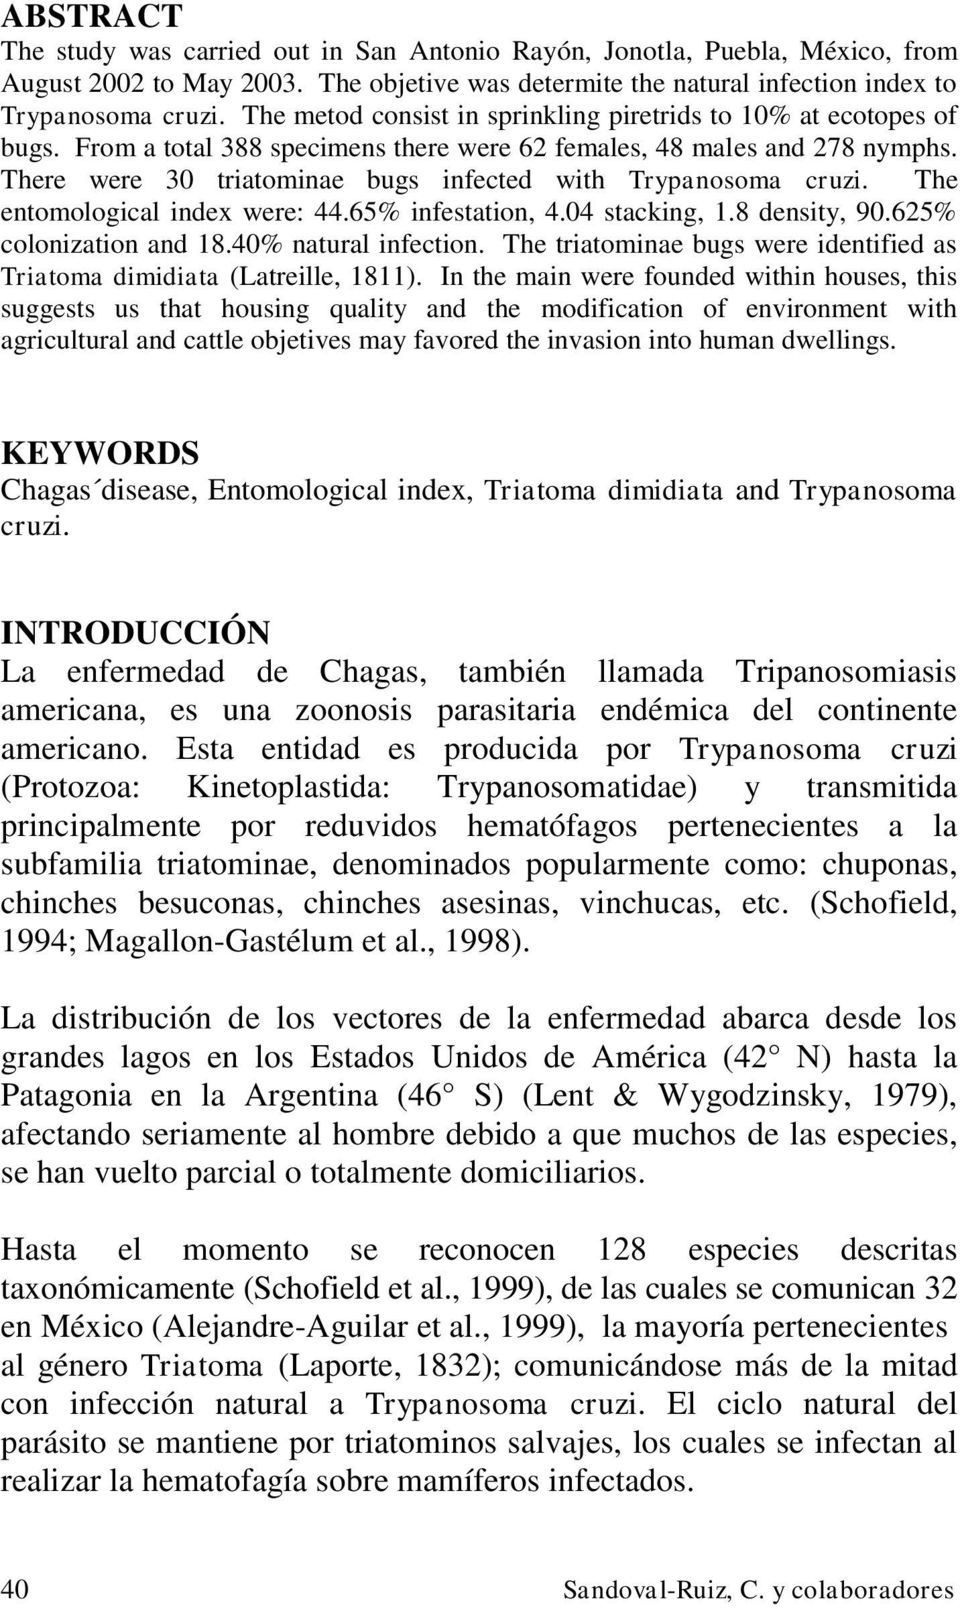 There were 30 triatominae bugs infected with Trypanosoma cruzi. The entomological index were: 44.65% infestation, 4.04 stacking, 1.8 density, 90.625% colonization and 18.40% natural infection.